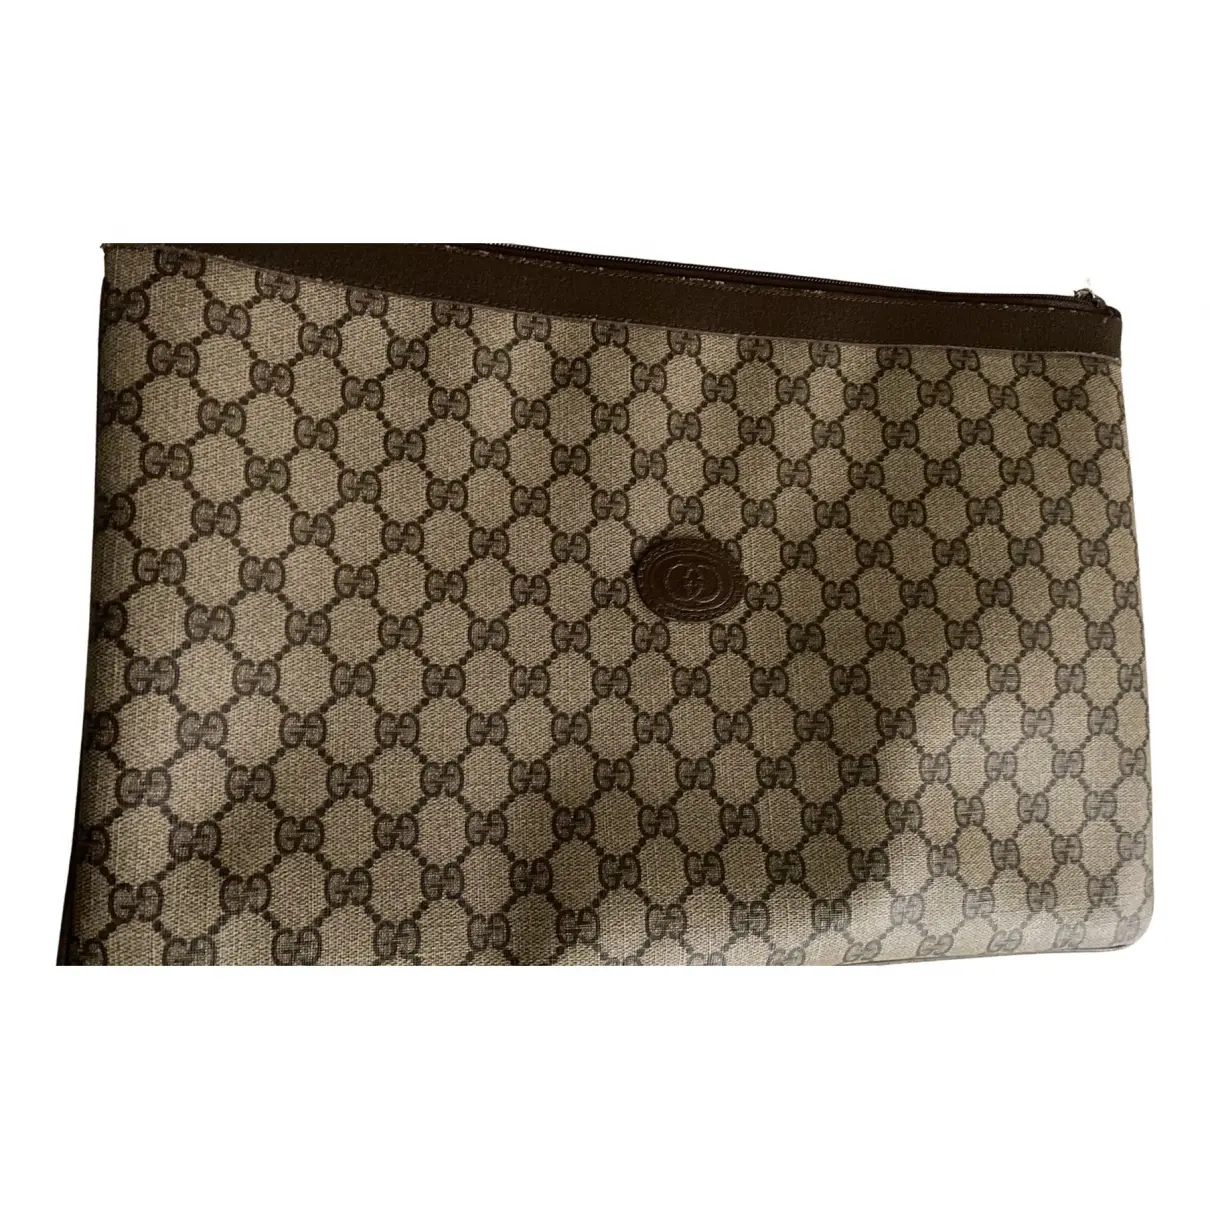 Ophidia leather clutch bag Gucci - Vintage